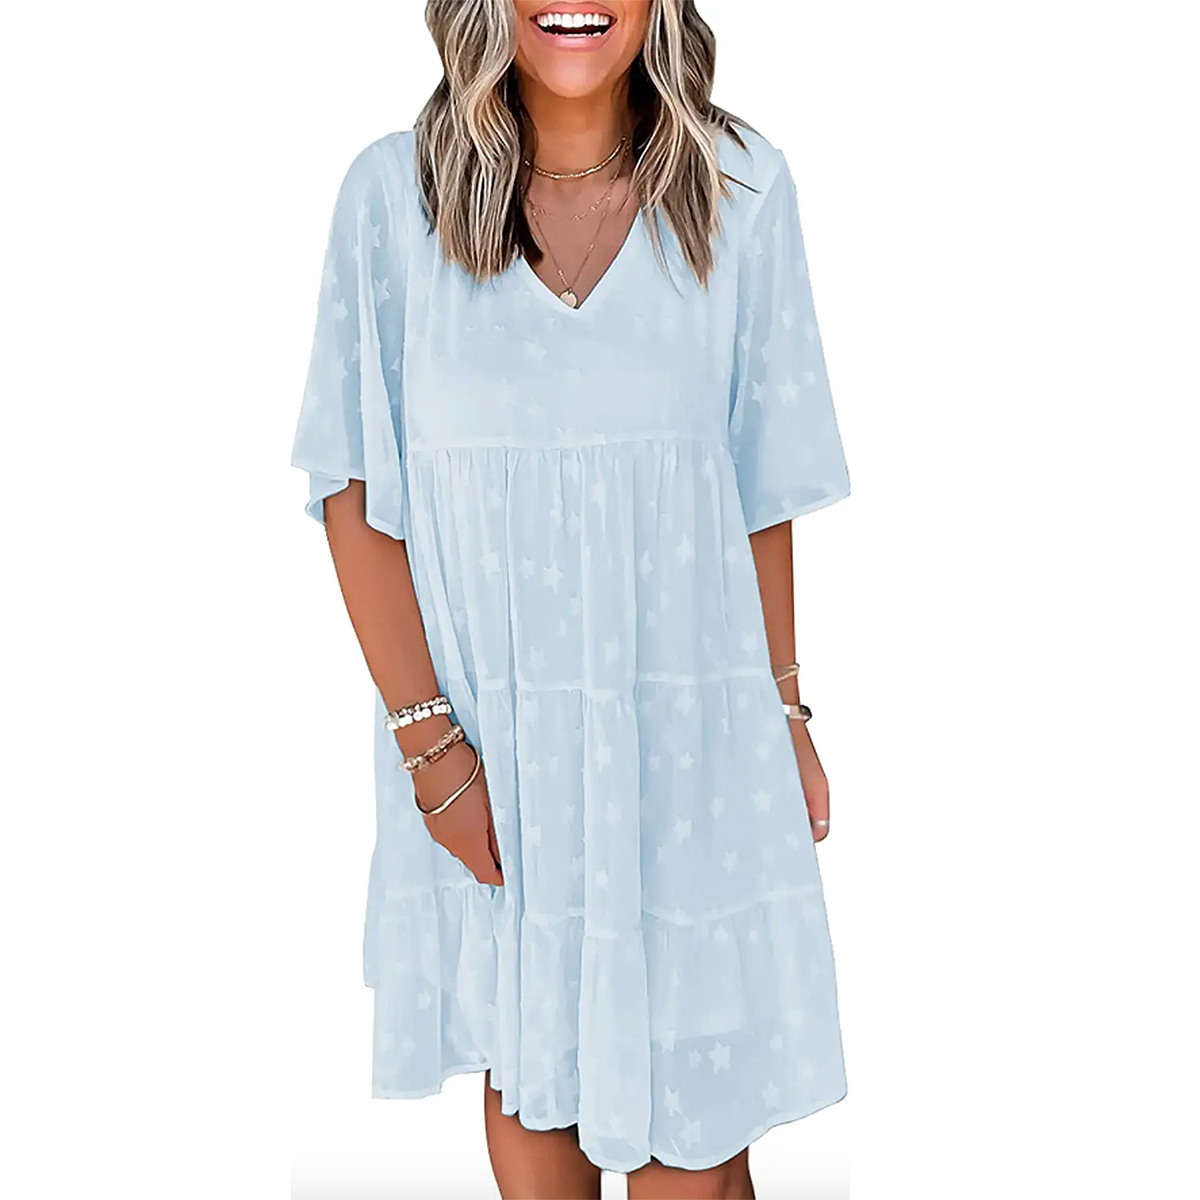 Bridal Shower Guest Dress Ideas — Our Top Picks | Us Weekly